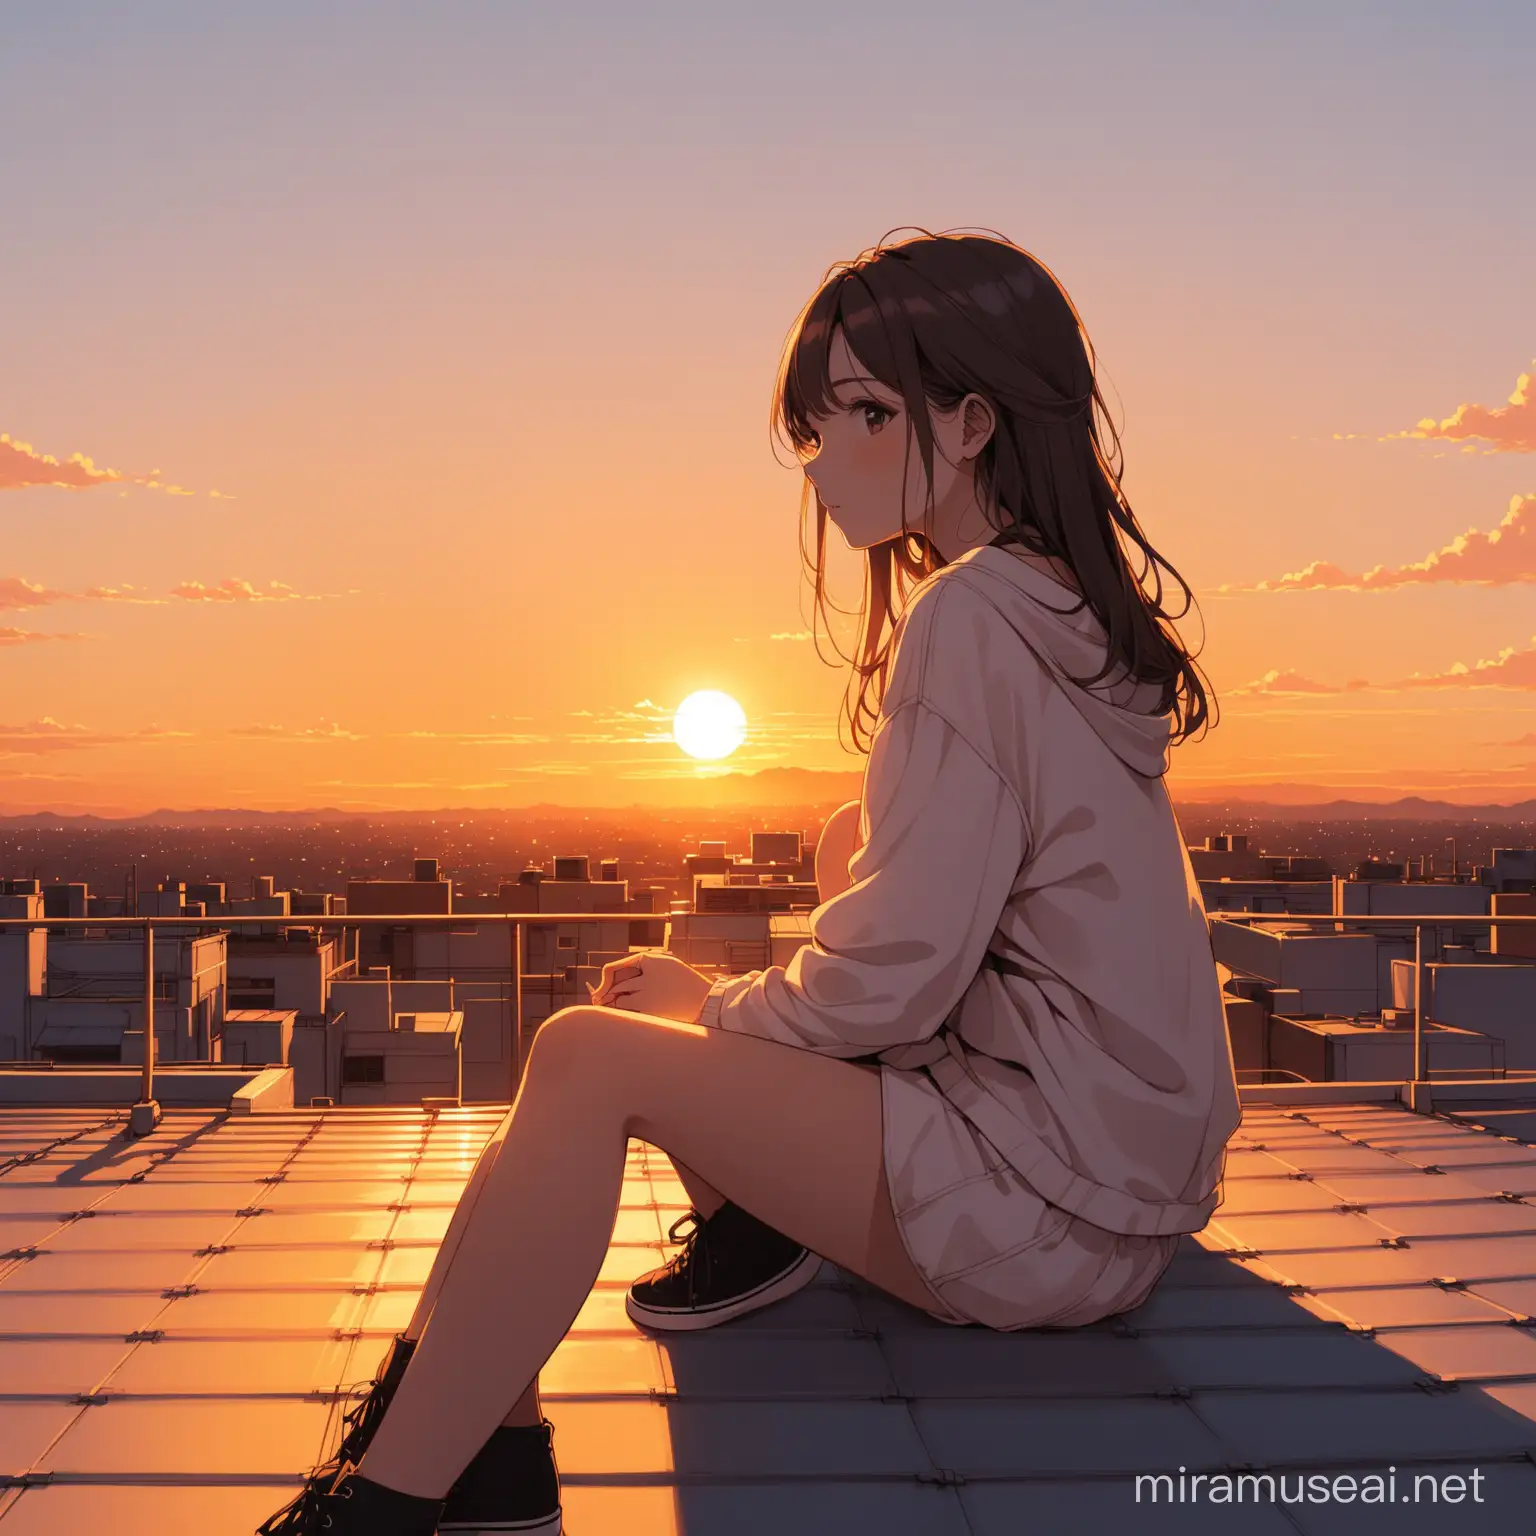 Aesthetic Young Girl Seating on Rooftop at Sunset